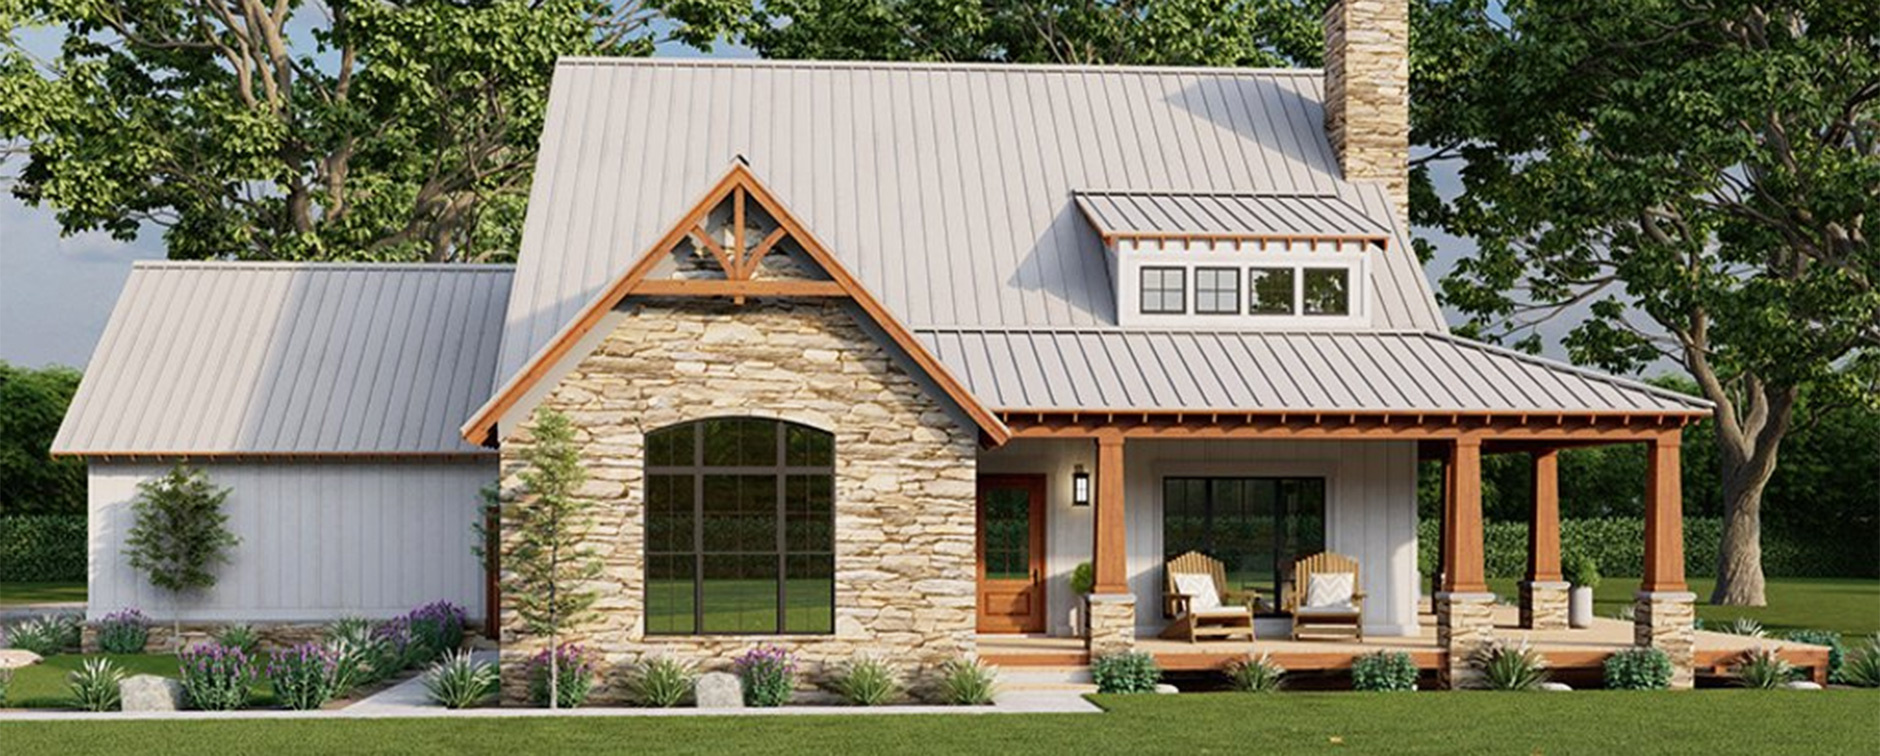 Discover the Beauty of Craftsman House Plans